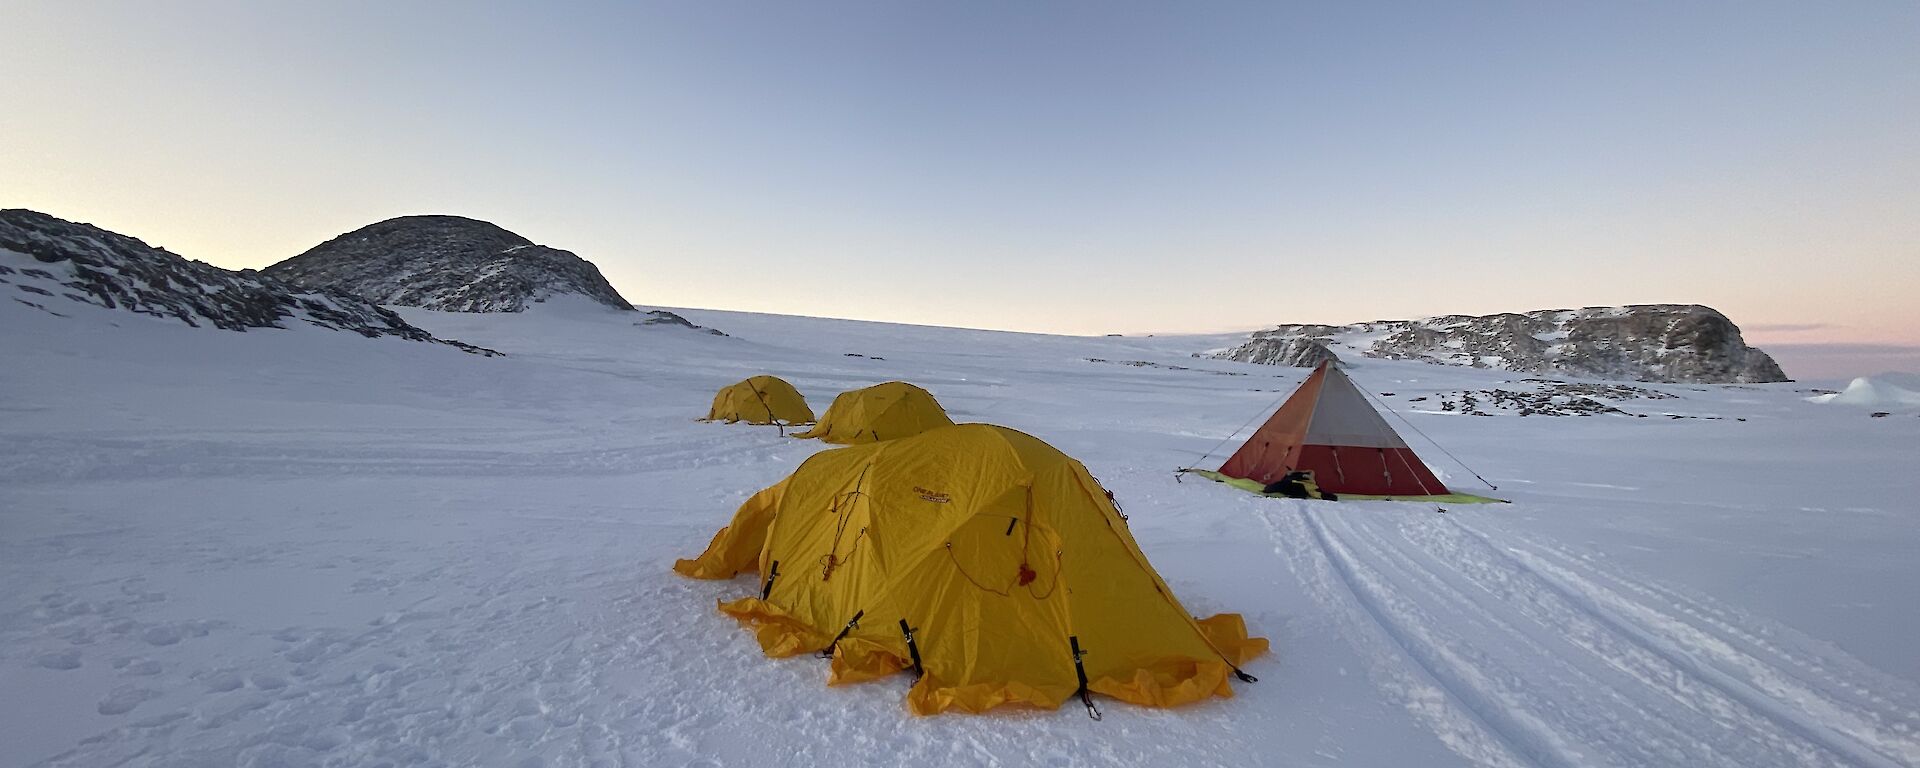 Four tents, three dome shaped and one pyramid, erected on area of flat snow covered ground. In the distance sunset brings a faint orange glow to the horizon.